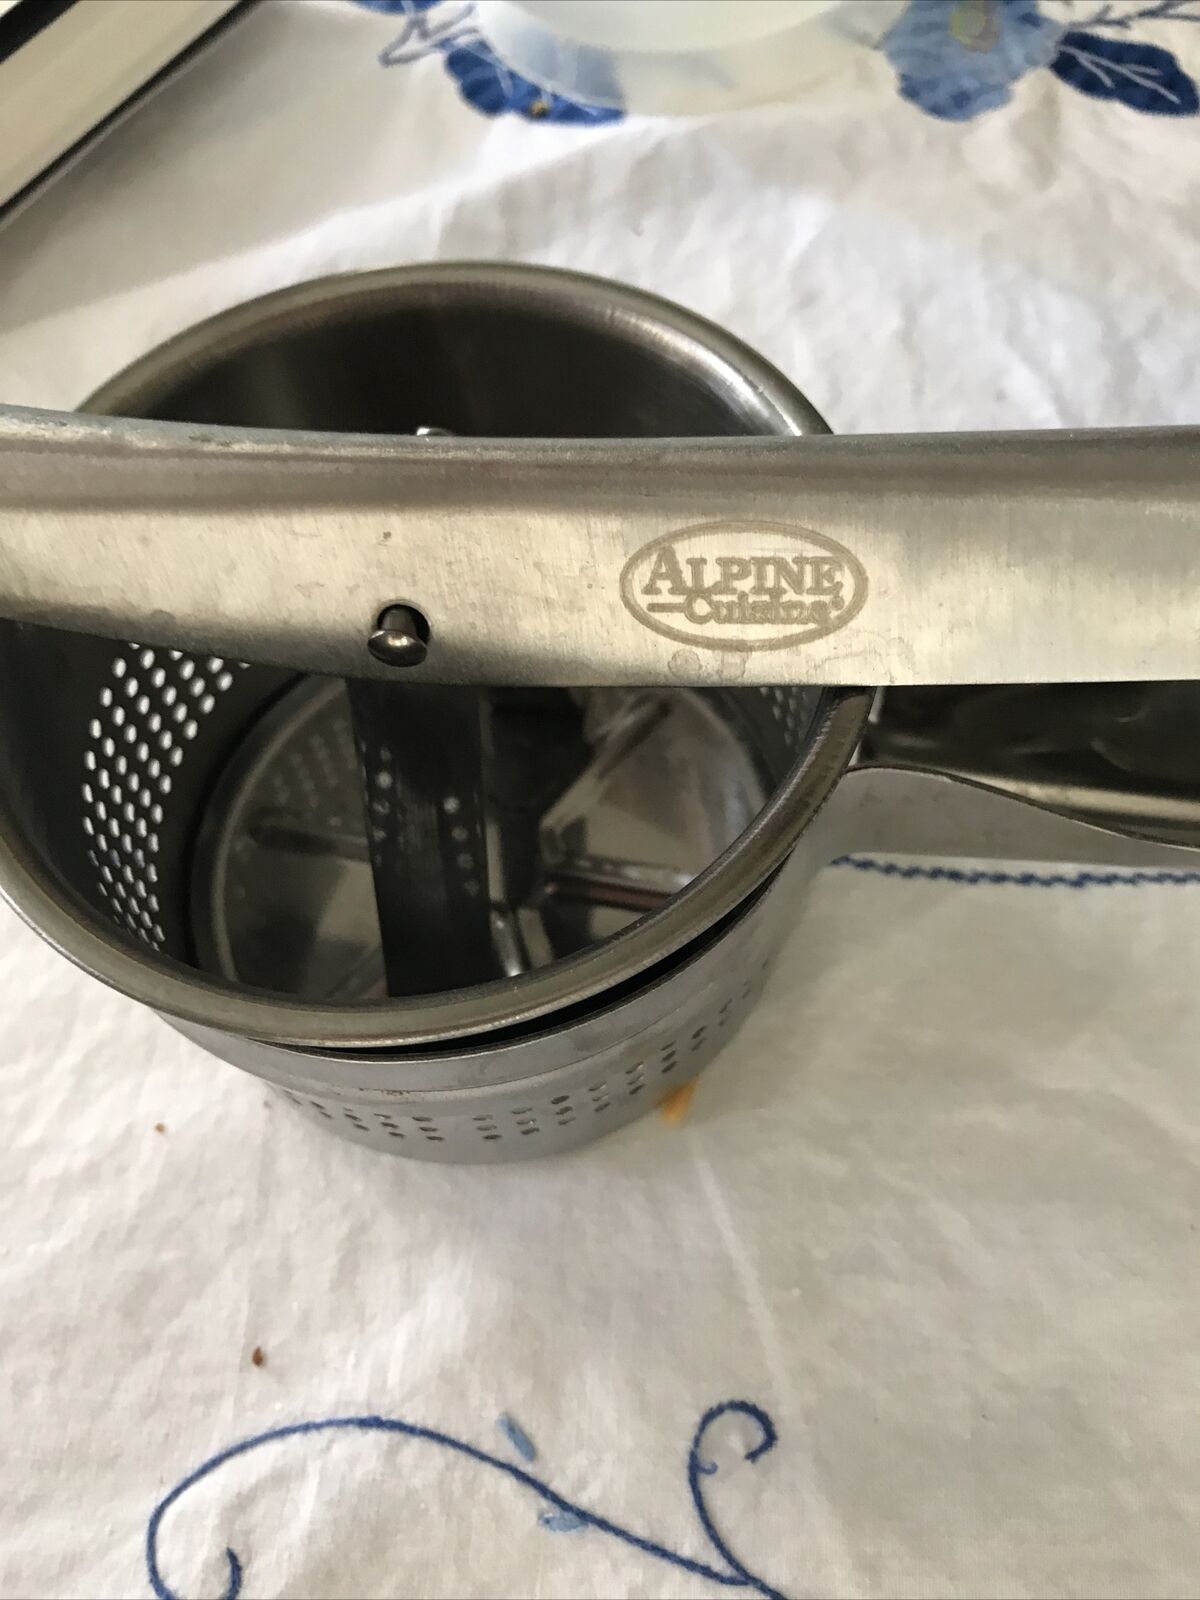 Vintage Metal Potato Ricer~makes Cooked Veggies And Fruits Into Baby Food.